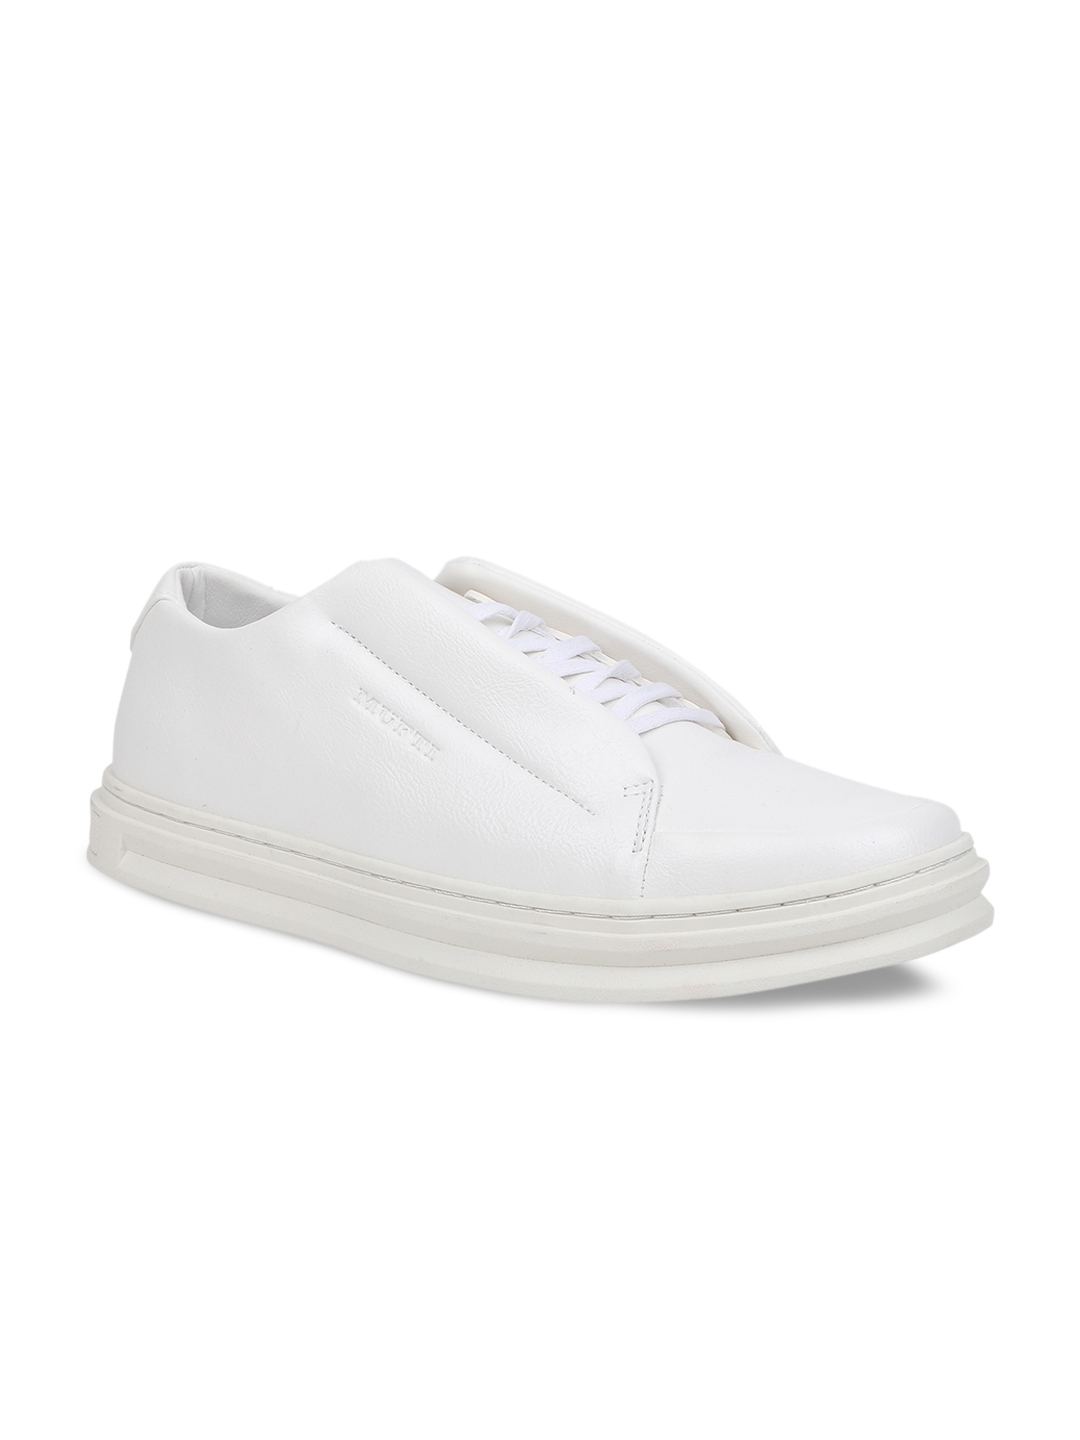 Mufti Men White Sneakers - Casual Shoes 